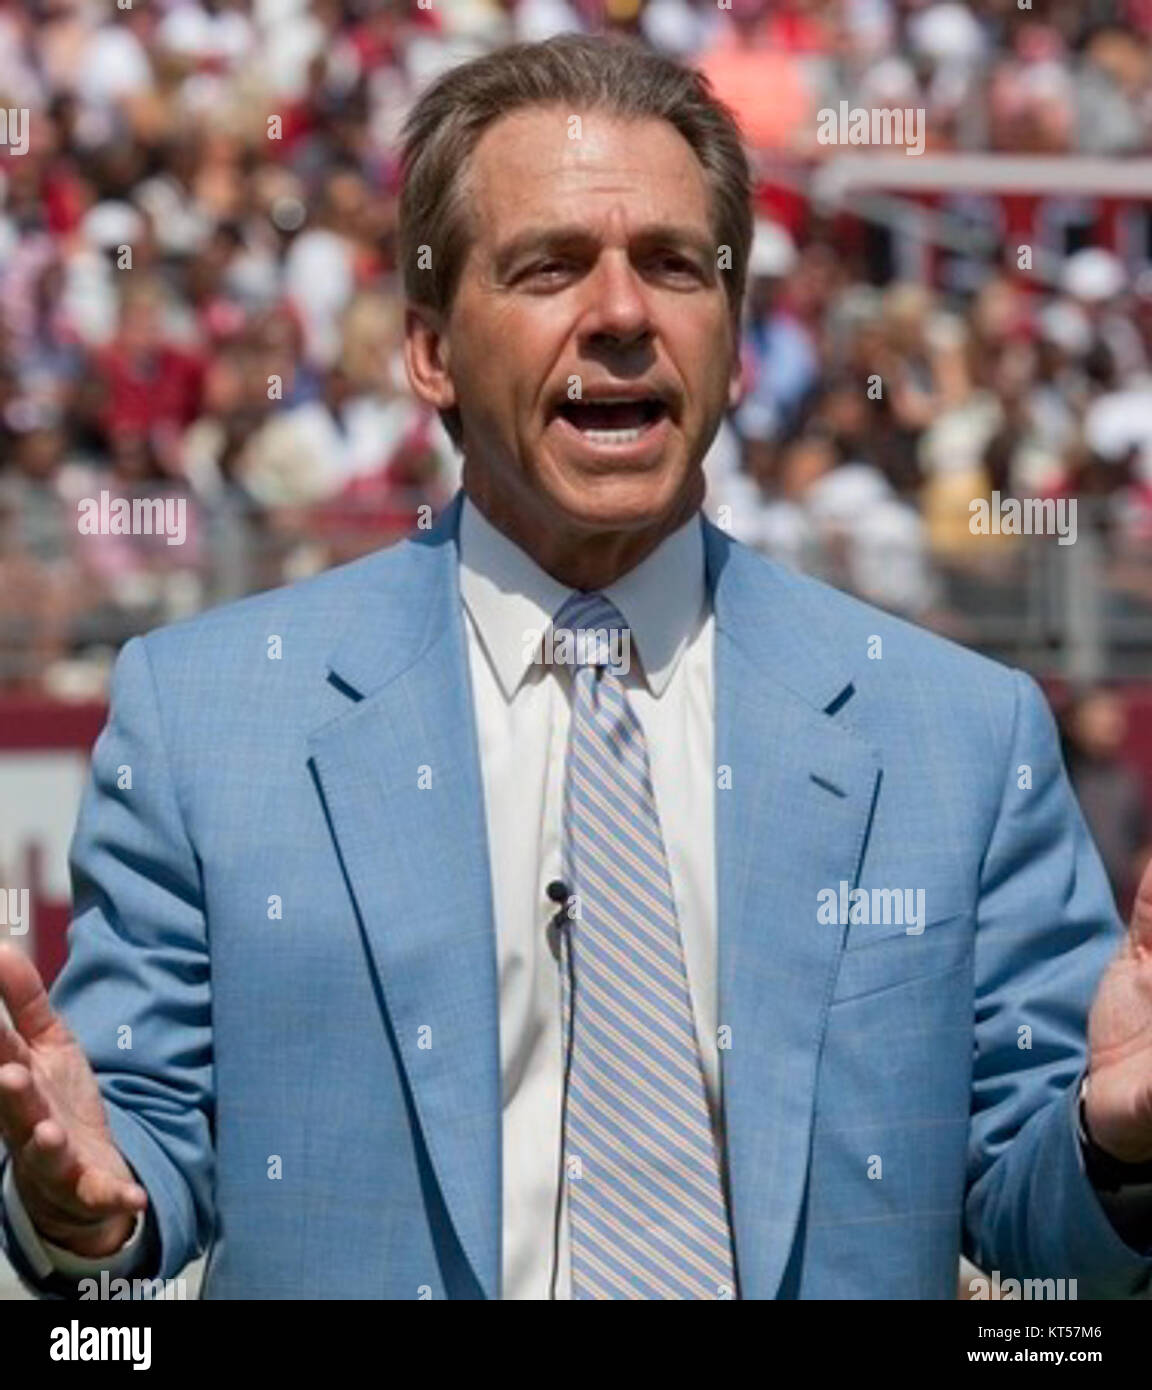 Nick Saban  who is the Alabama team coach  gives interviews and watches all the plays during this important spring scrimmage at University of Alabama  Tuscaloosa  Alabama LCCN2010638313 (cropped) Stock Photo